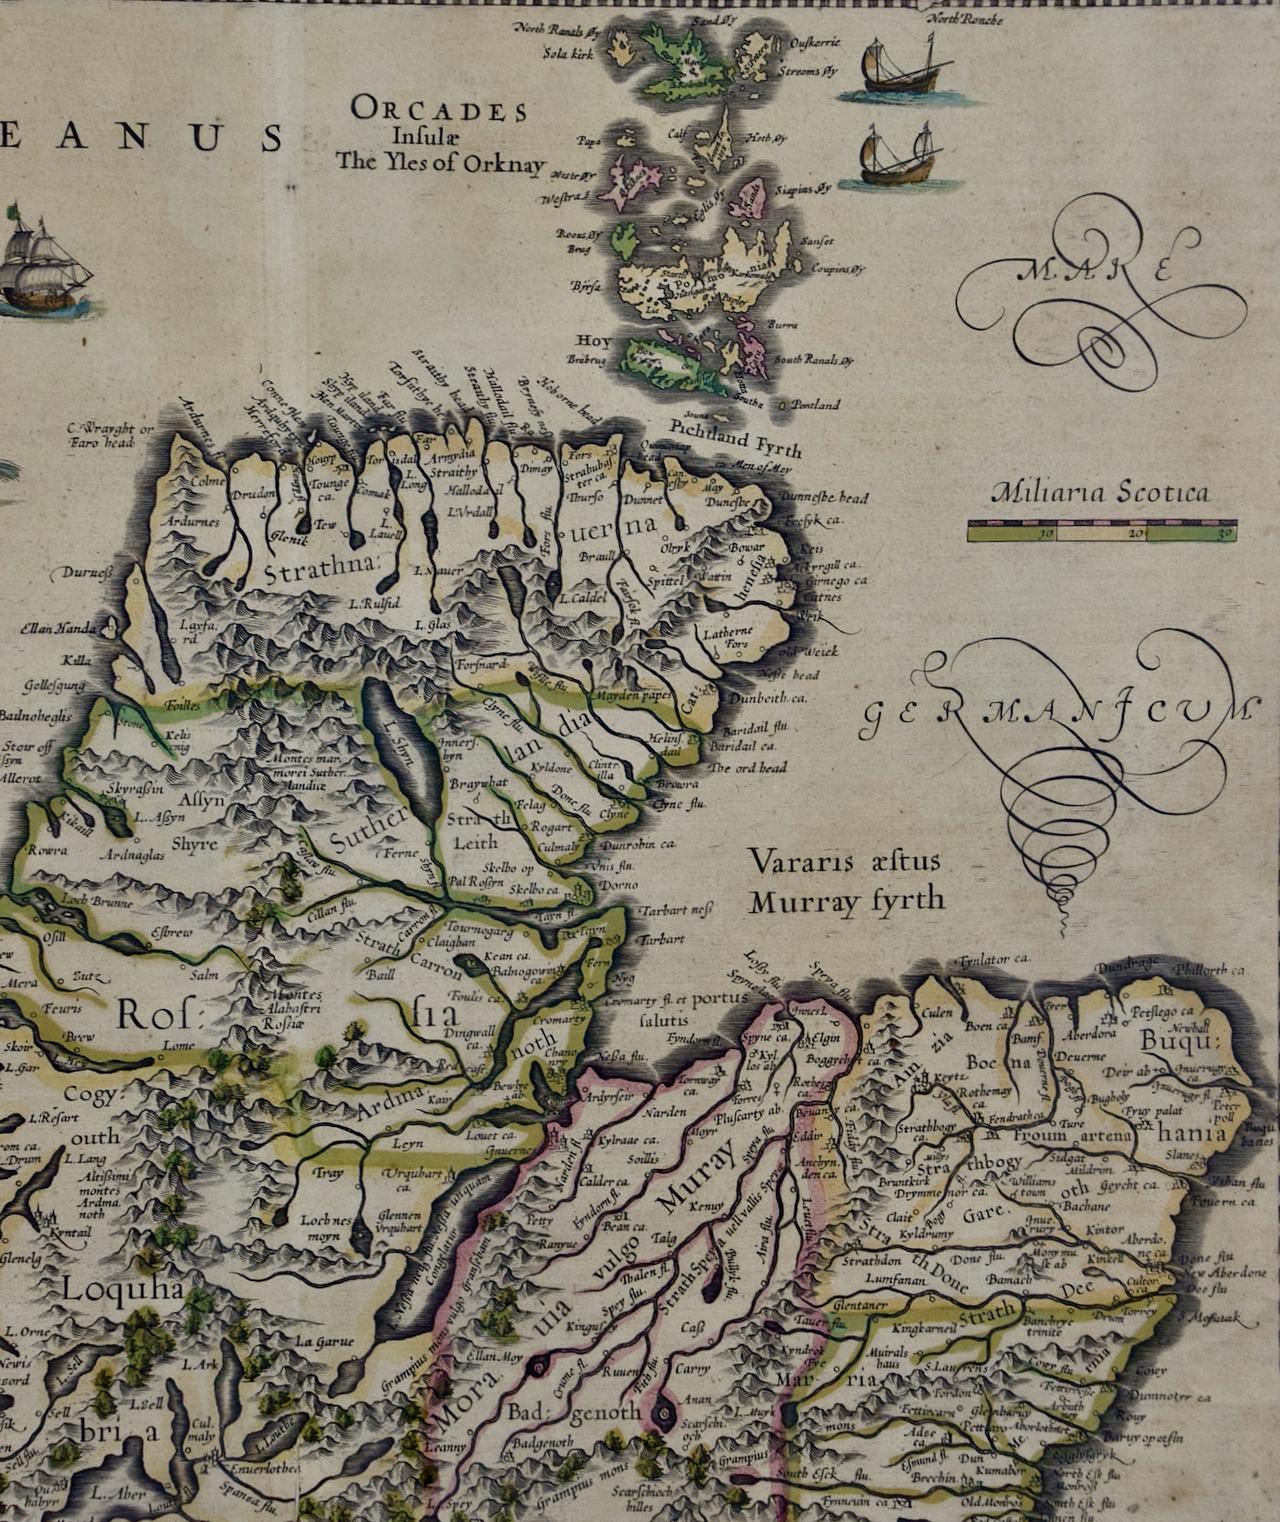 Northern Scotland: 17th Century Hand-colored Map by Mercator - Other Art Style Print by Gerard Mercator